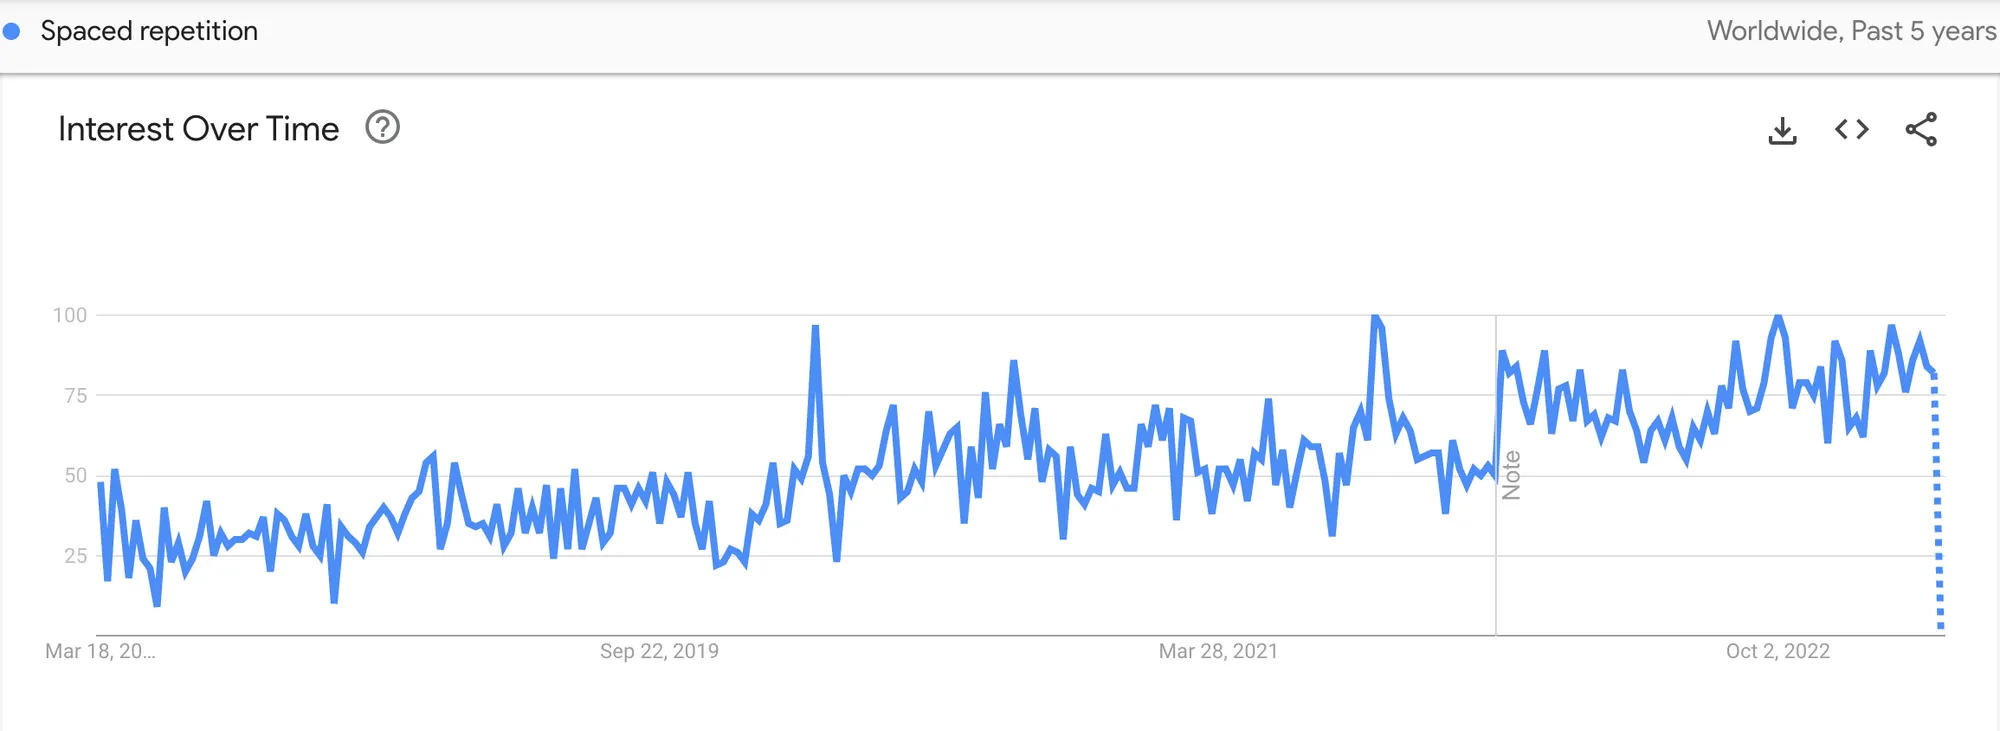 The rise of spaced repetition: interest in “Spaced repetition” on Google Trends over the past 5 years